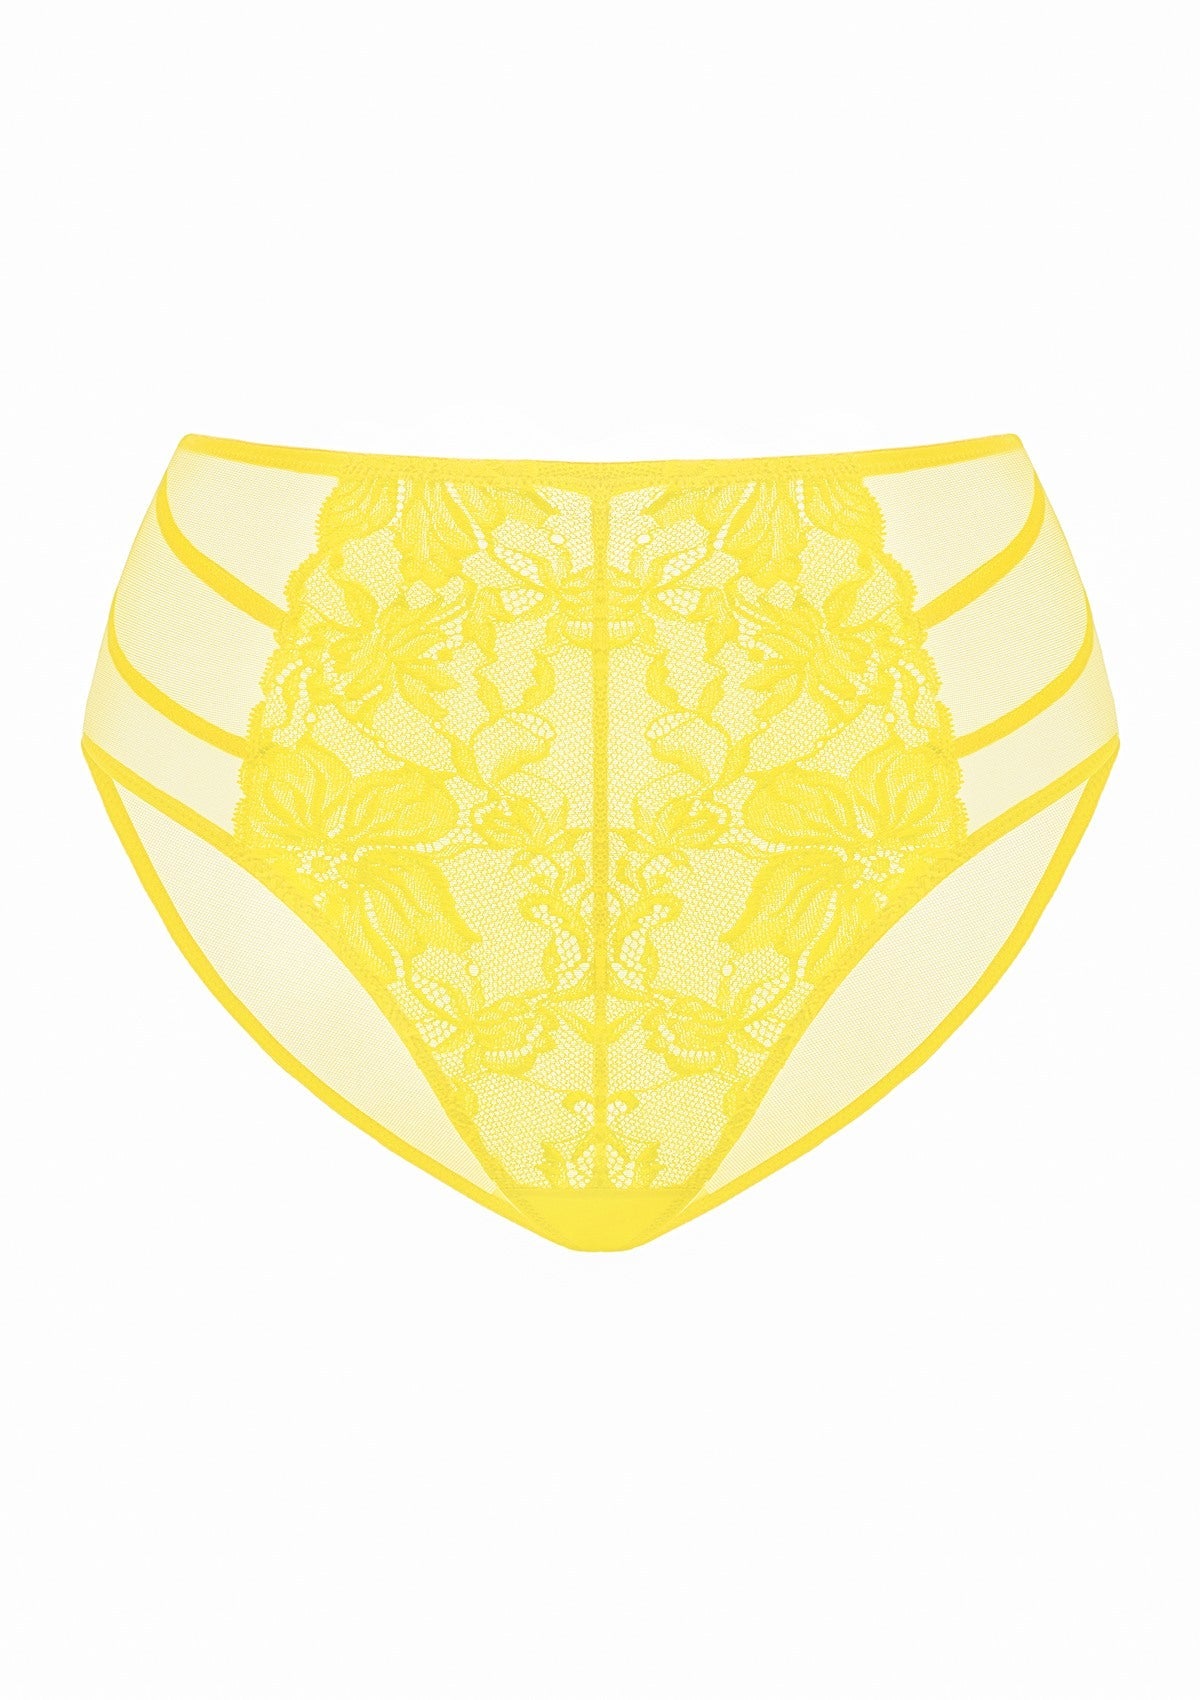 HSIA Spring Romance High-Rise Floral Lacy Panty-Comfort In Style - XXXL / Bright Yellow